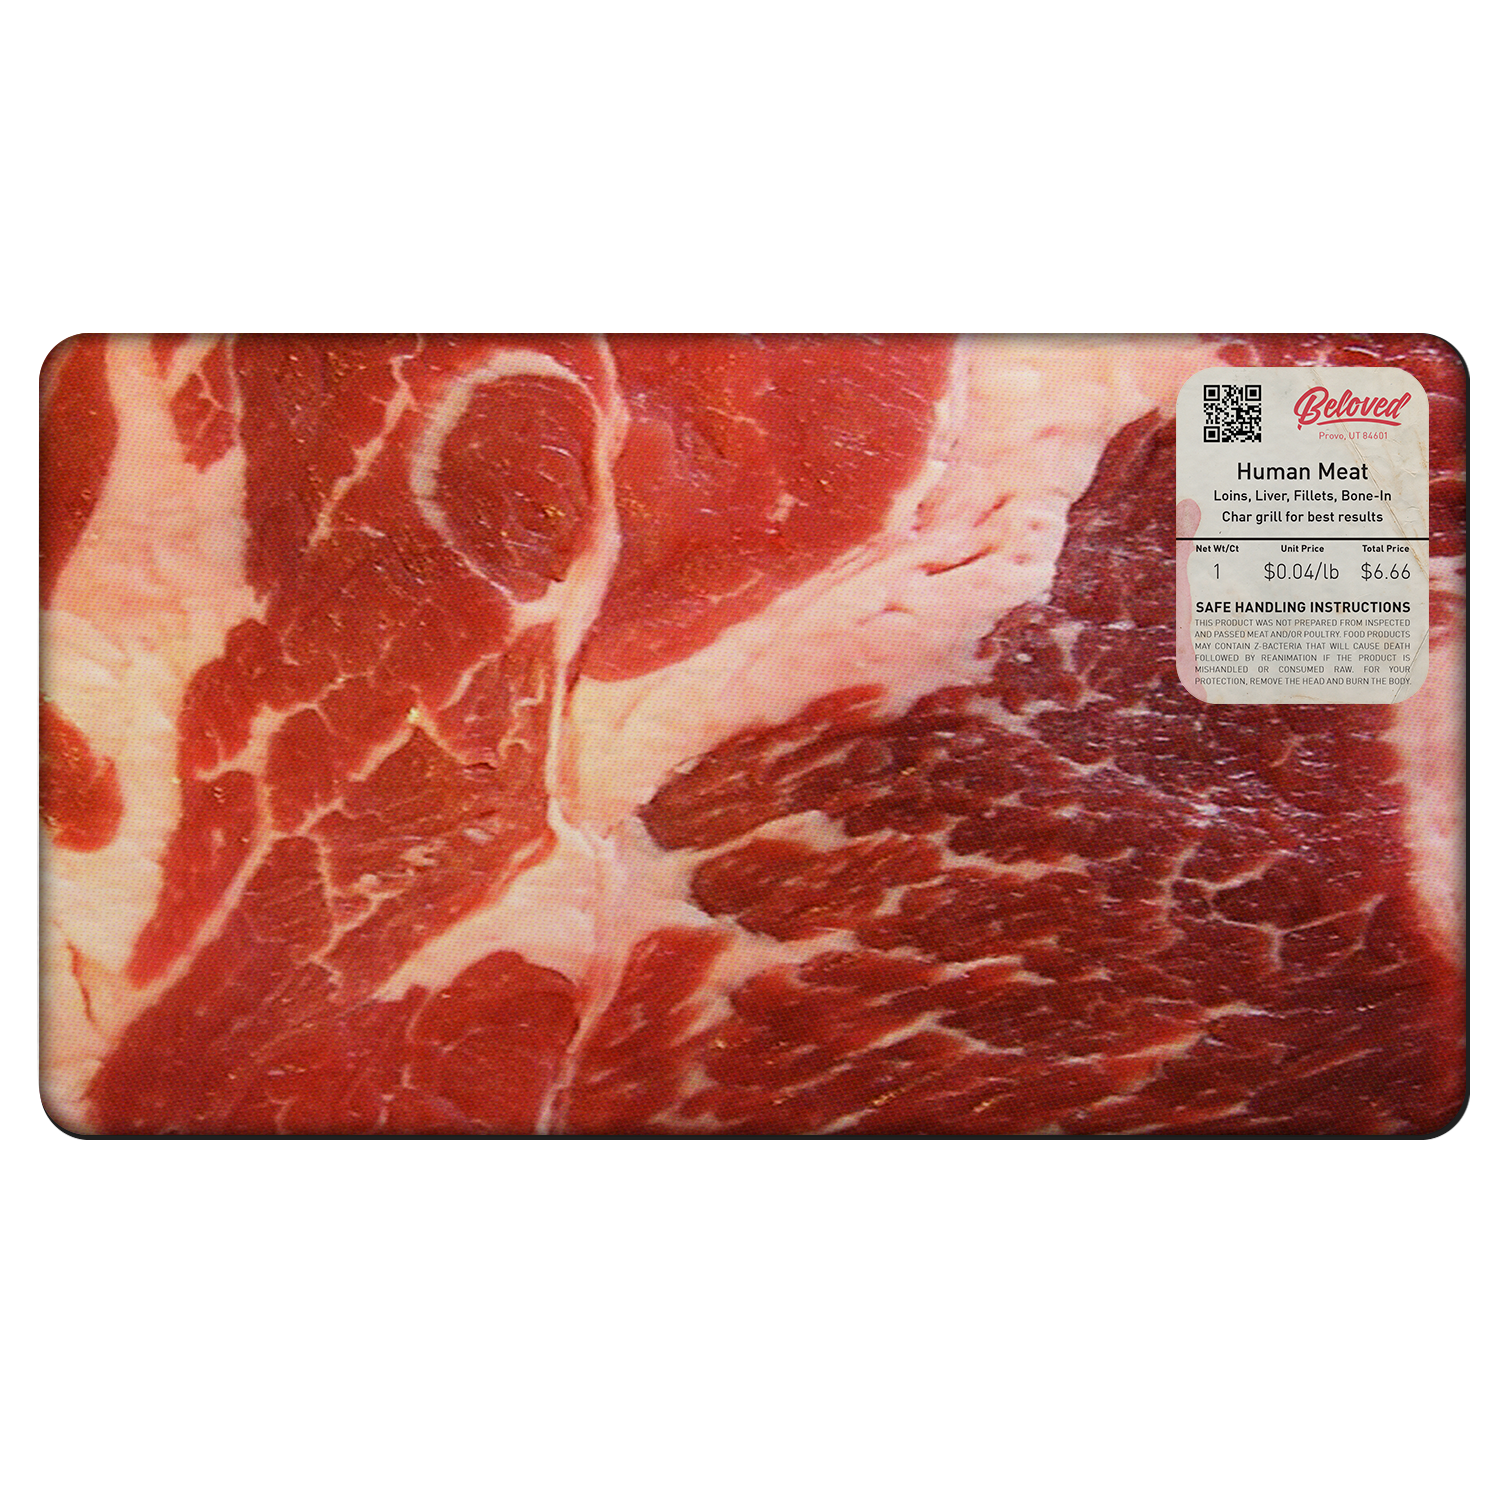 meat texture seamless